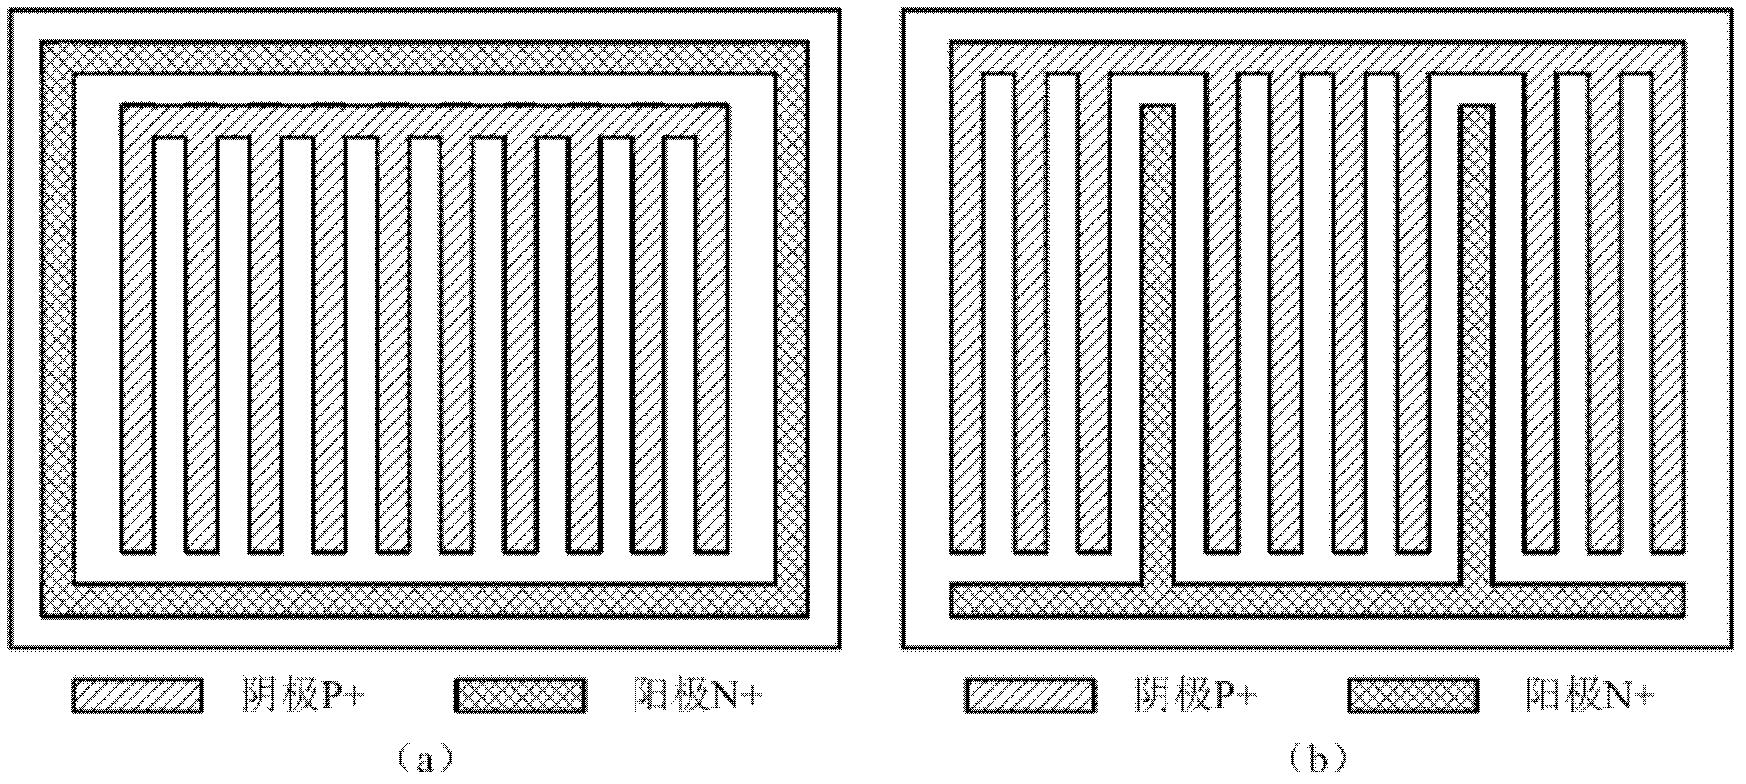 Lamination differential photoelectric detector based on standard CMOS (complementary metal oxide semiconductor) process